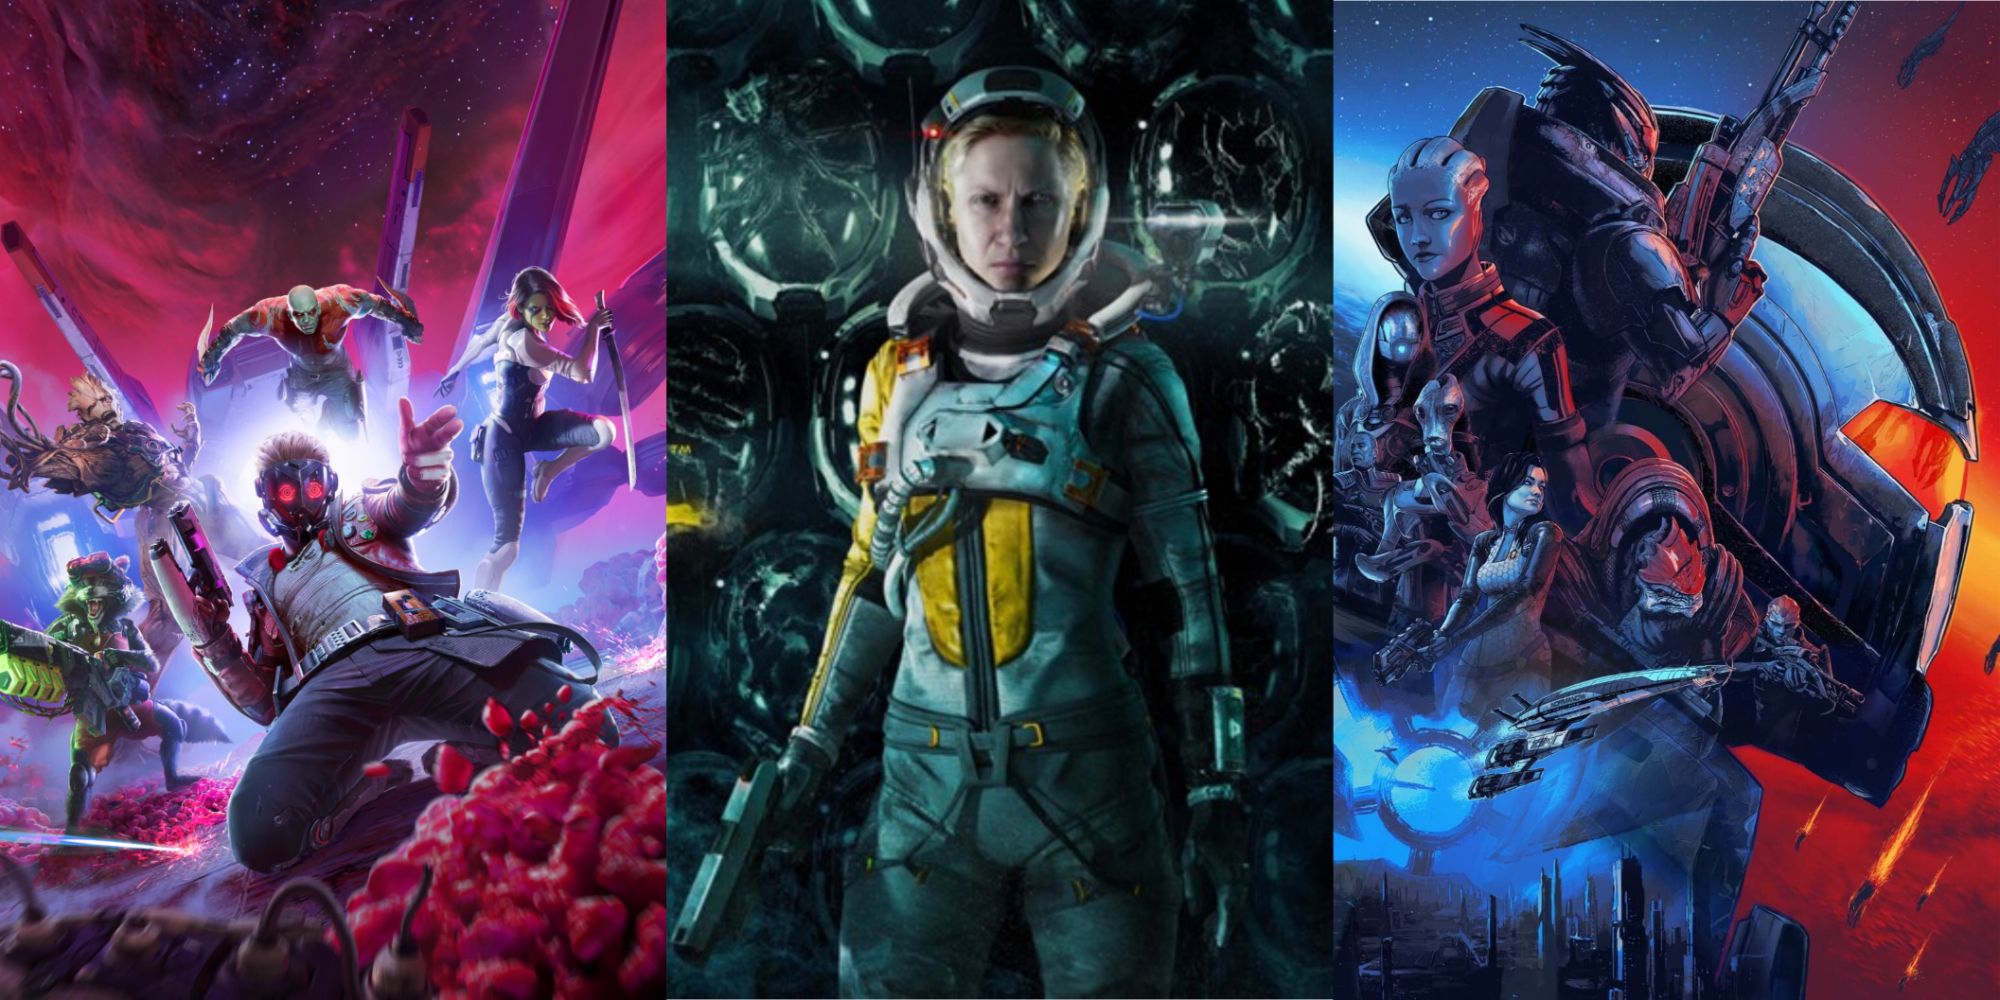 Games Like Star Trek: Guardians of the Galaxy, Returnal and Mass Effect posters